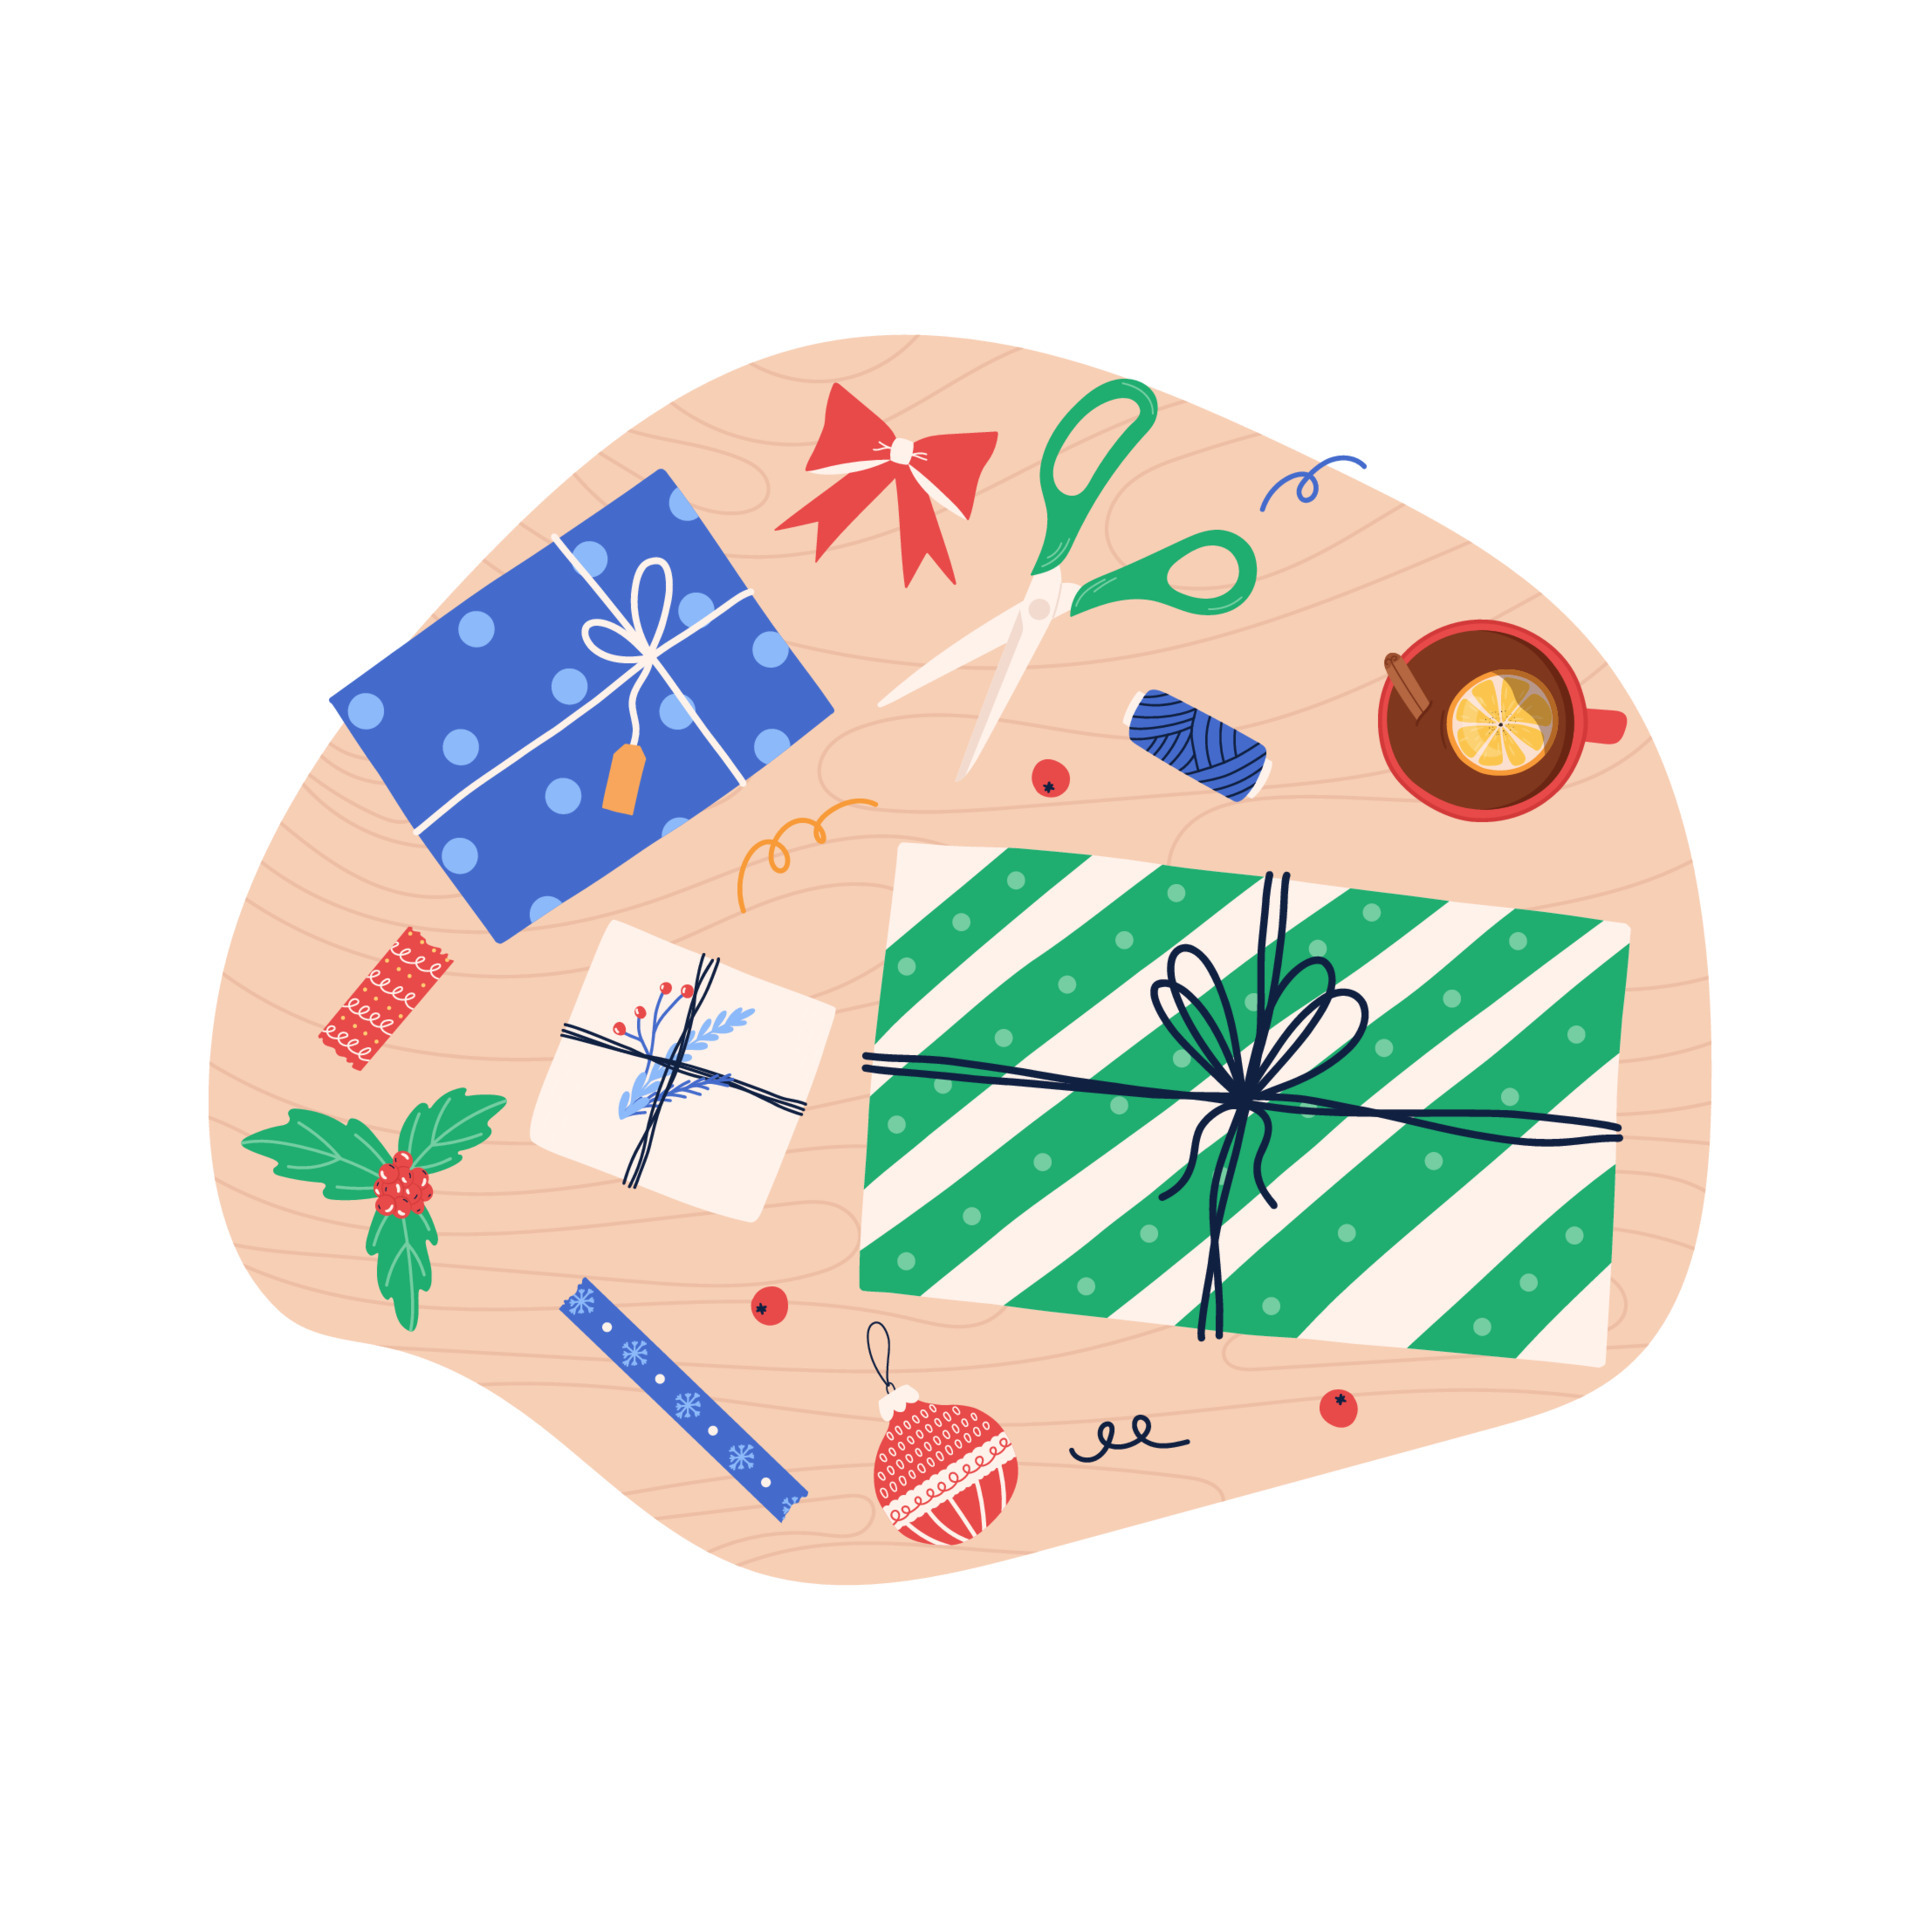 https://static.vecteezy.com/system/resources/previews/004/759/946/original/gift-wrapping-process-with-box-scissors-and-thread-from-above-flat-illustration-isolated-on-white-background-christmas-or-winter-holidays-presents-preparation-on-wooden-table-vector.jpg